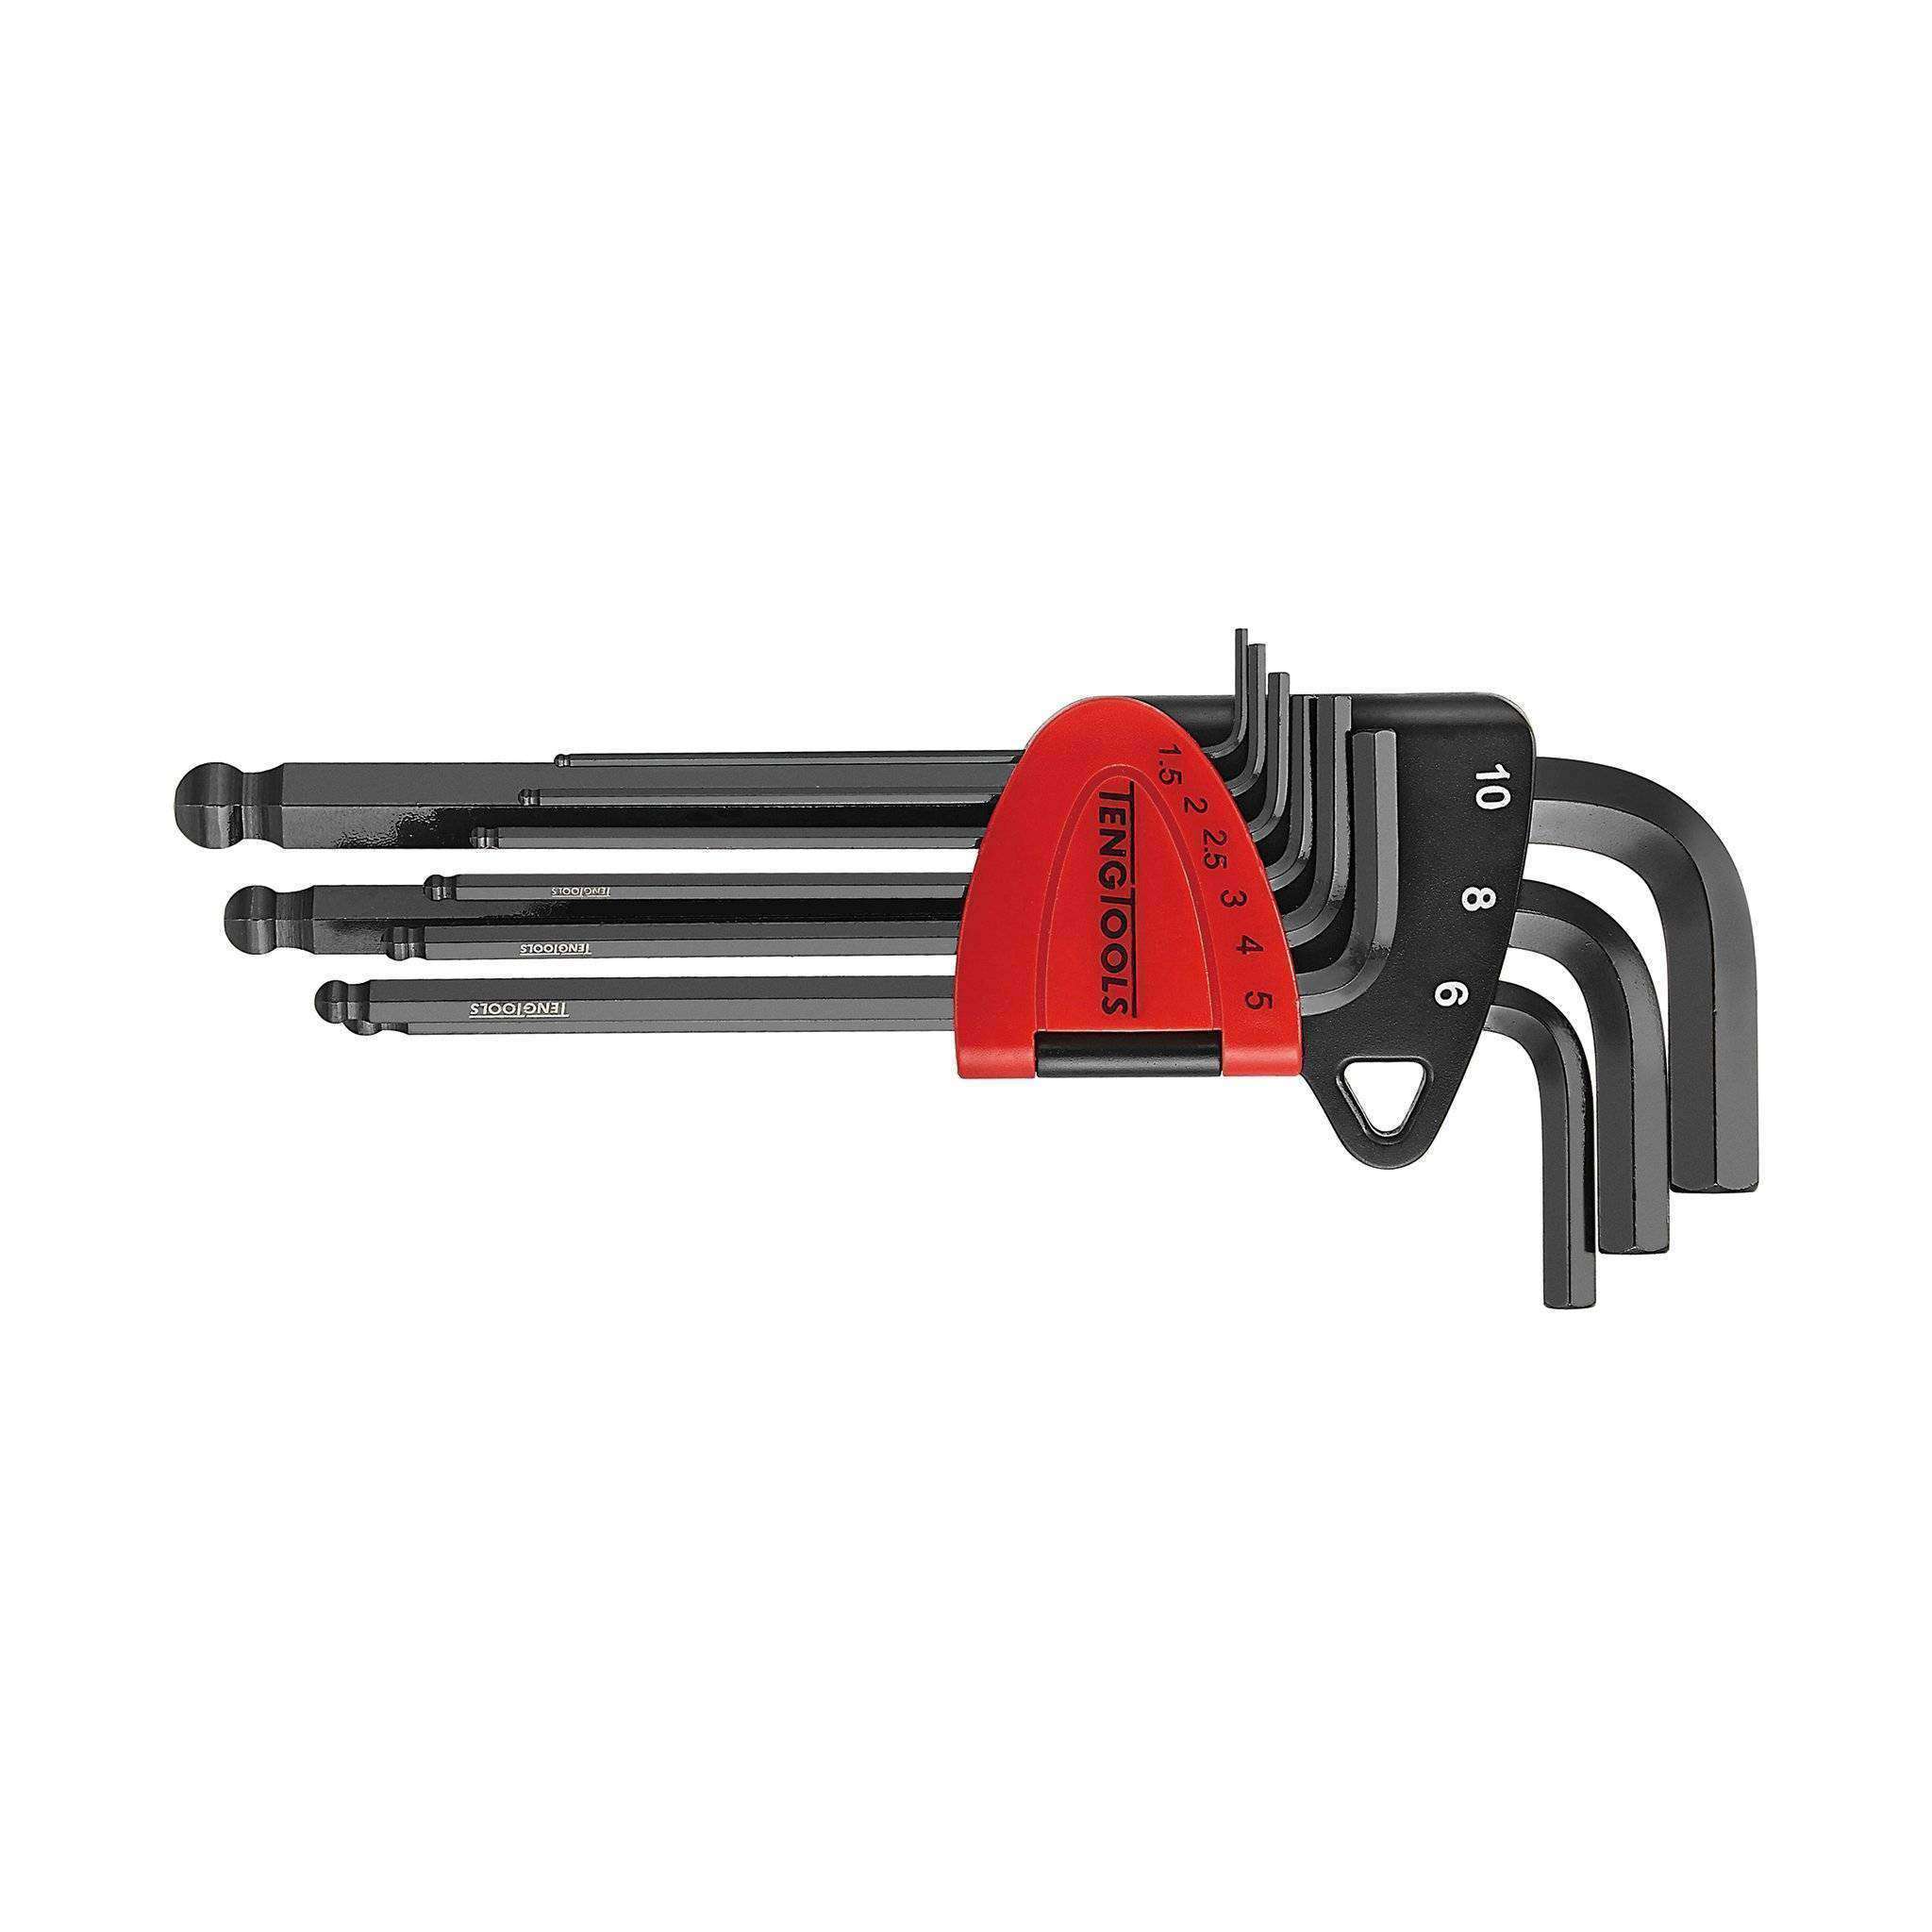 Teng Tools 9 Piece Metric Industrial Chrome Molybdenum Ball Point Hex Key/Allen Wrench Set - 1499MM